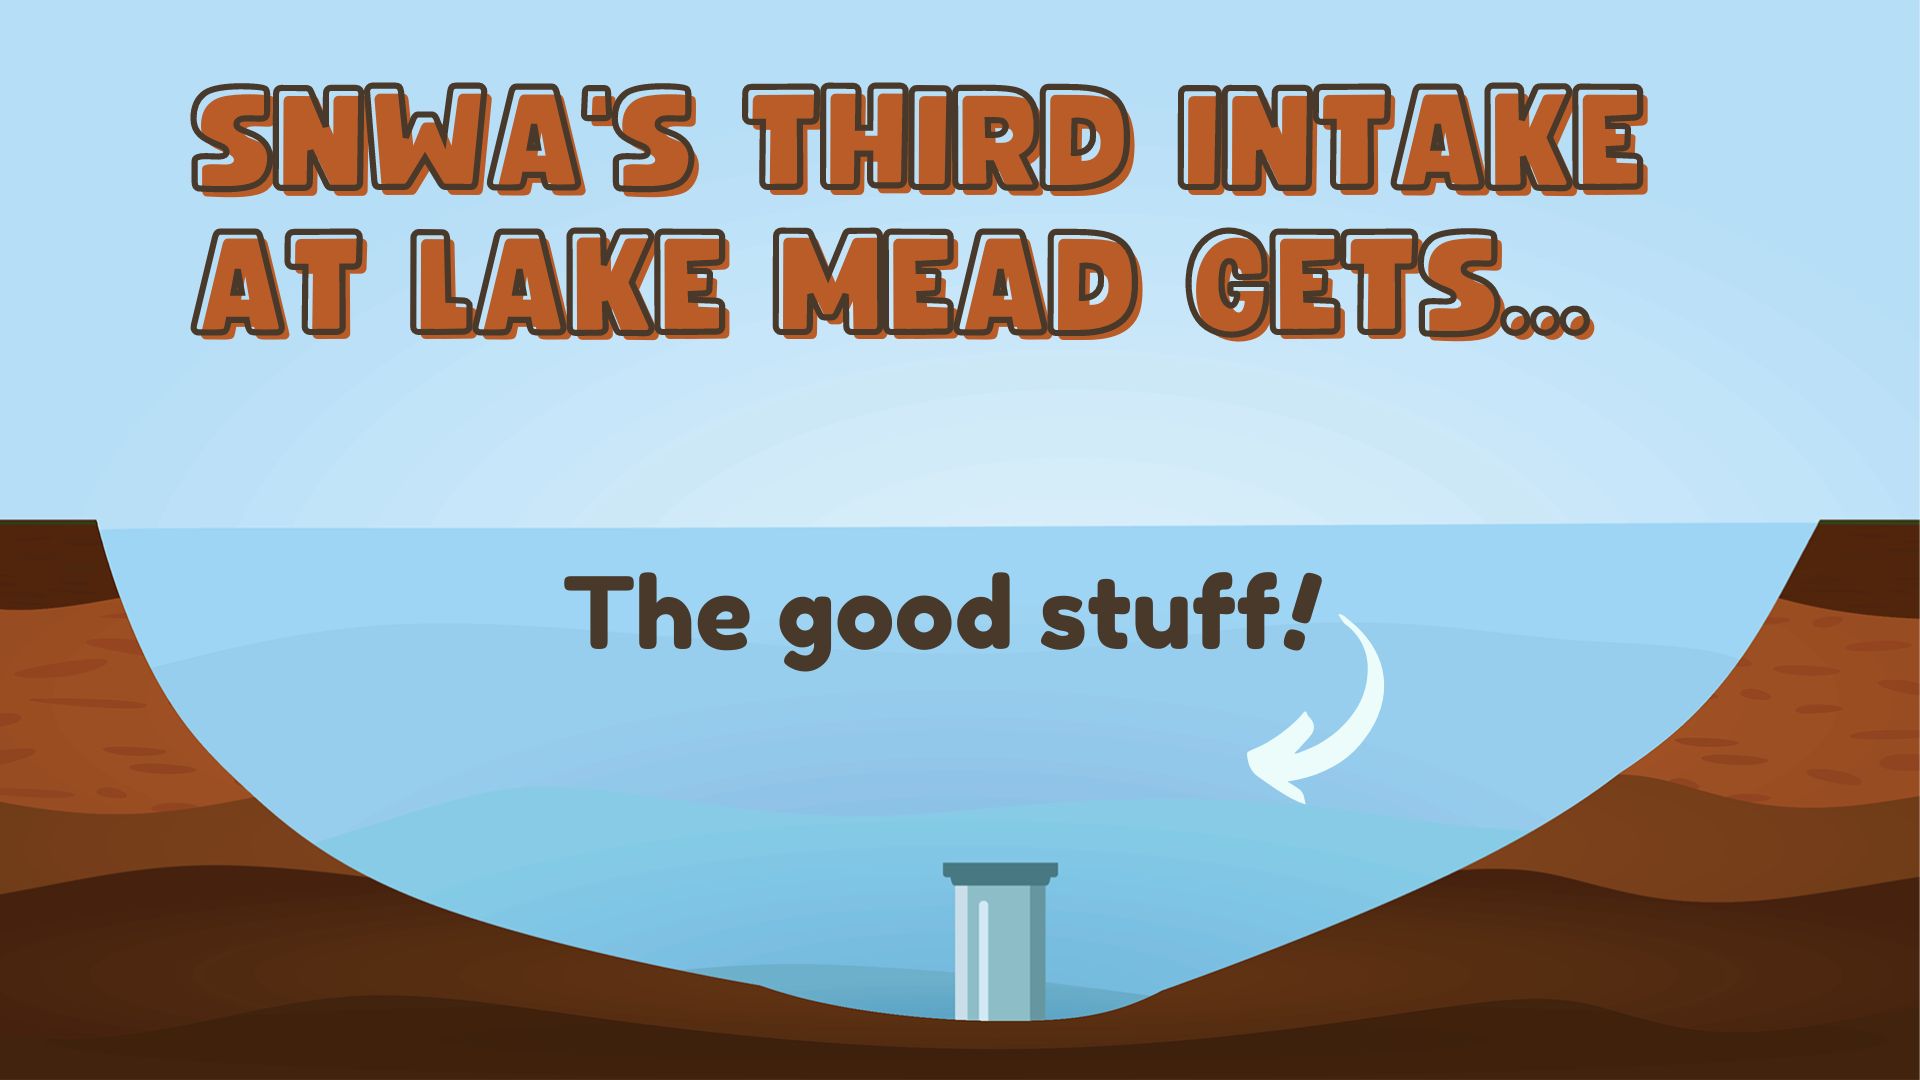 Graphic of pipe at bottom of lake says "SNWA"s third intake at lake mead gets...the good stuff!"